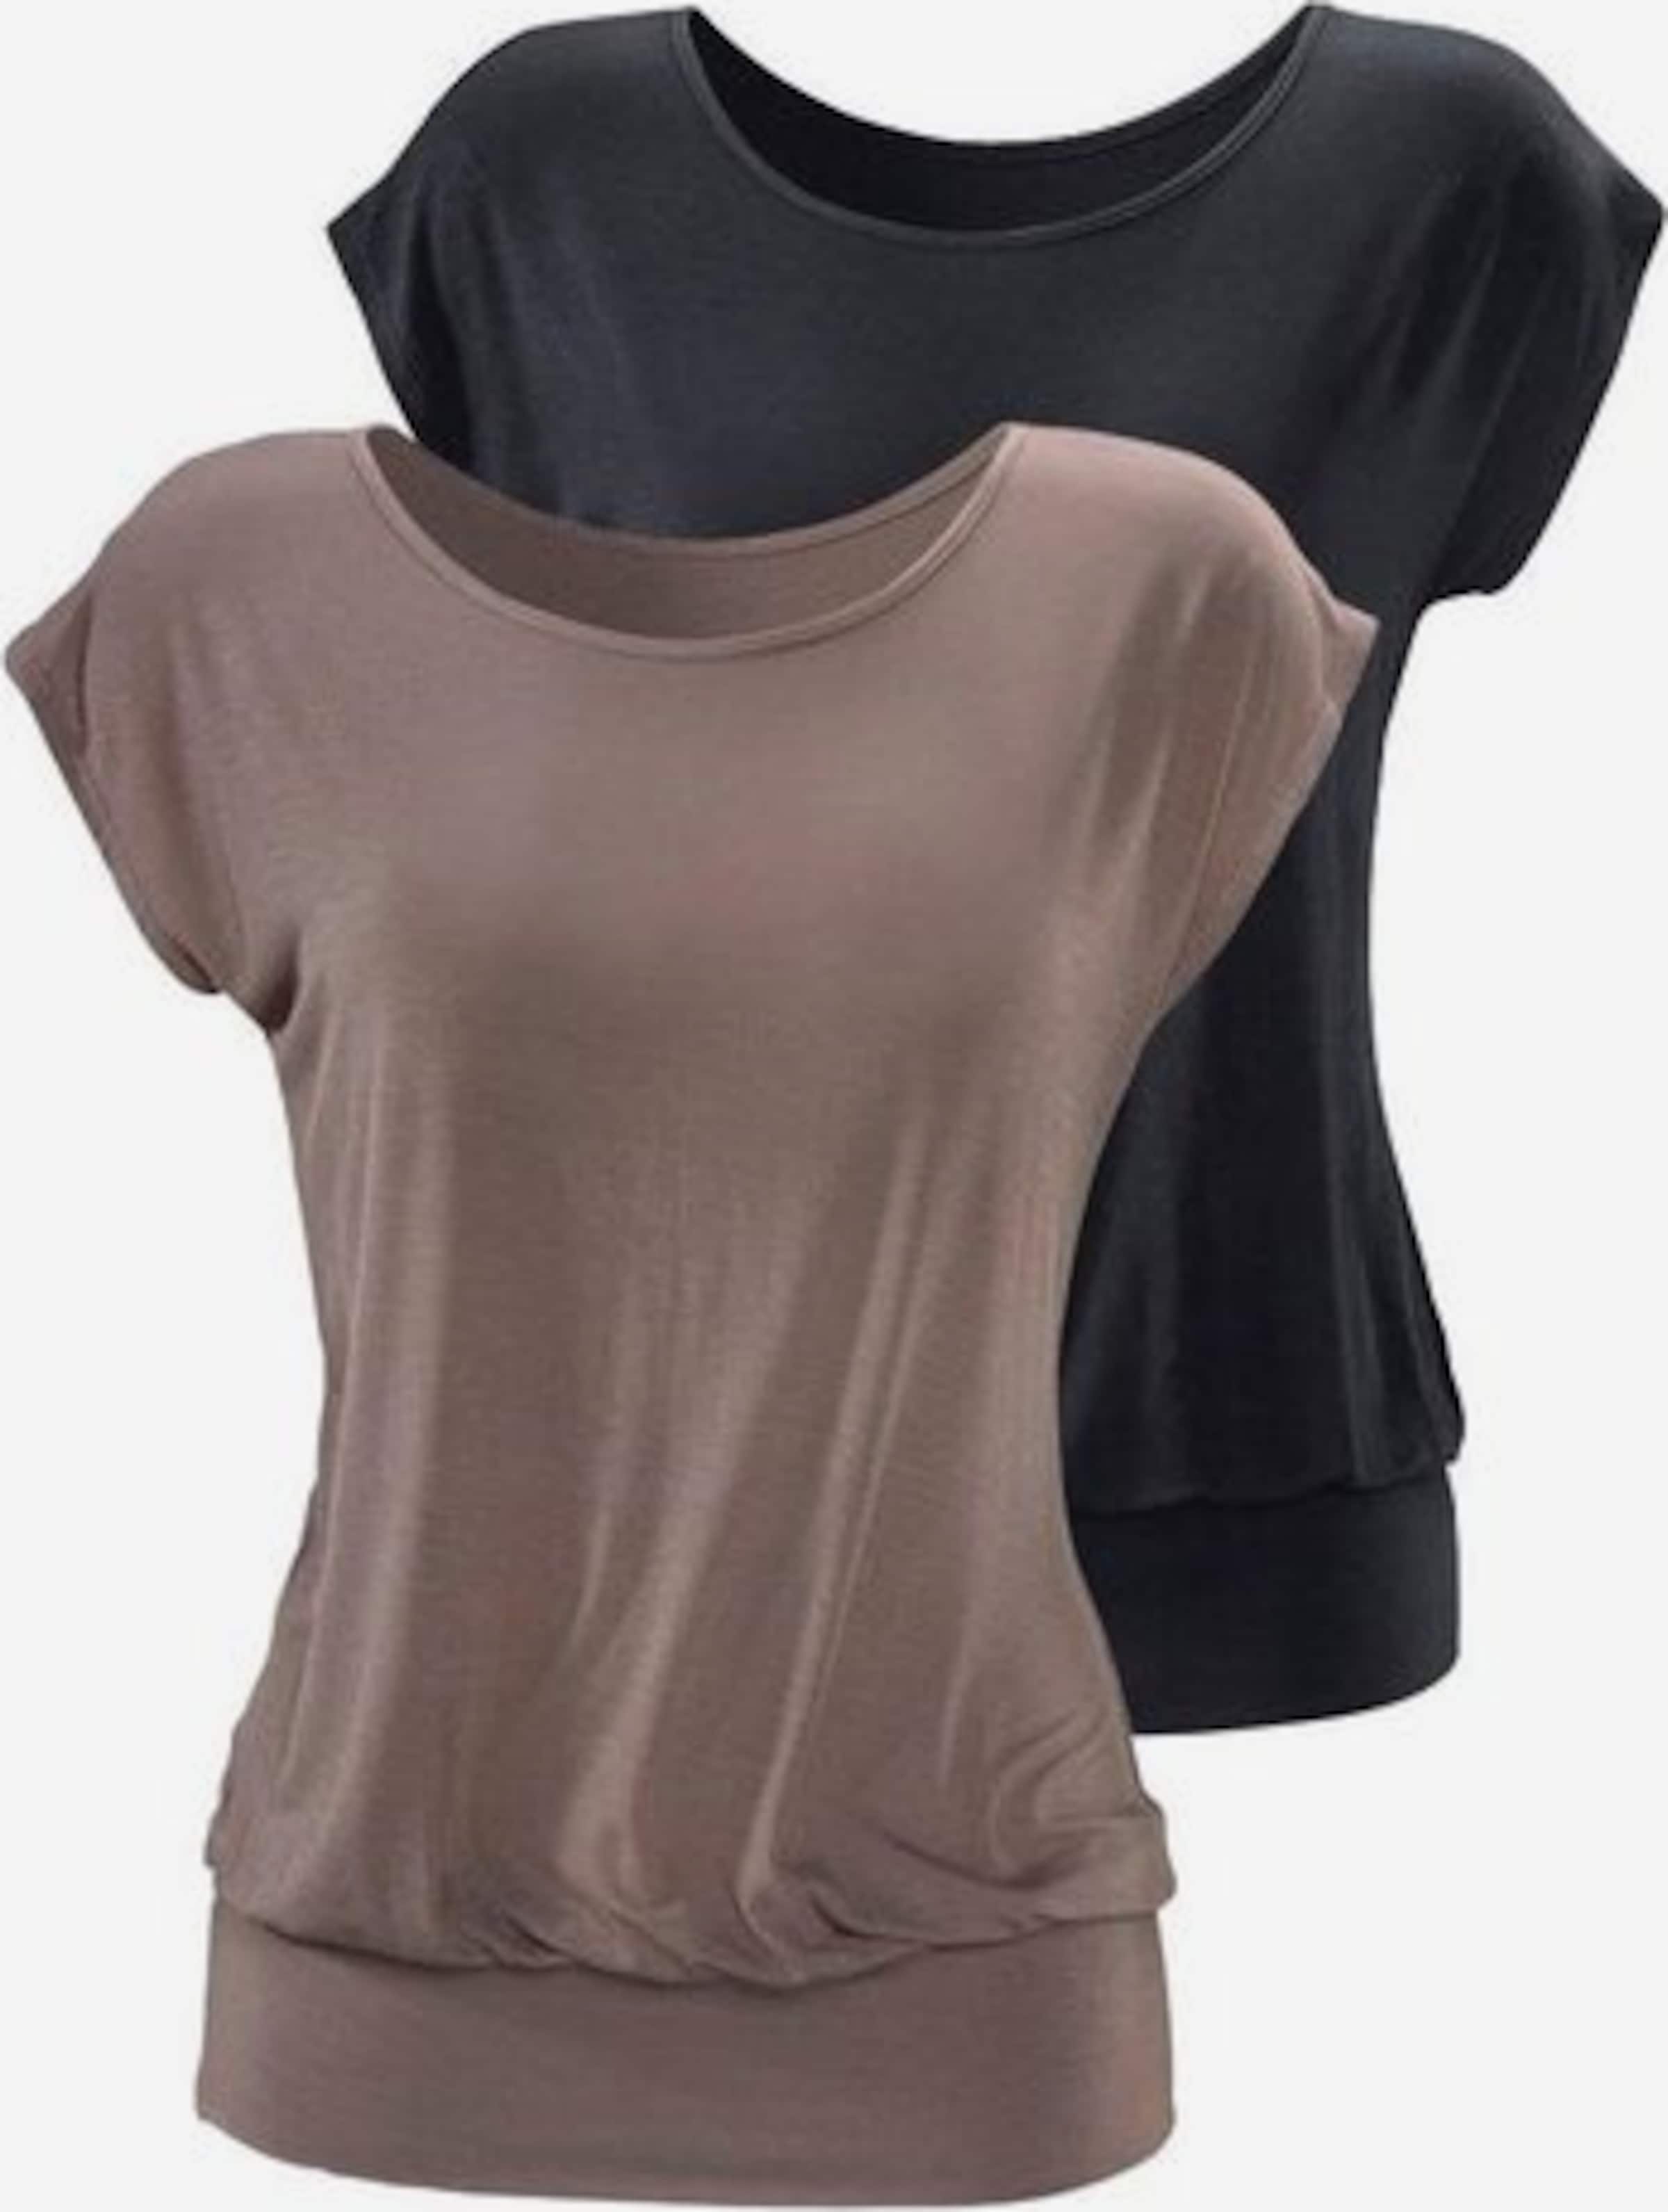 YOU | Black LASCANA Shirt in ABOUT Taupe, Regular